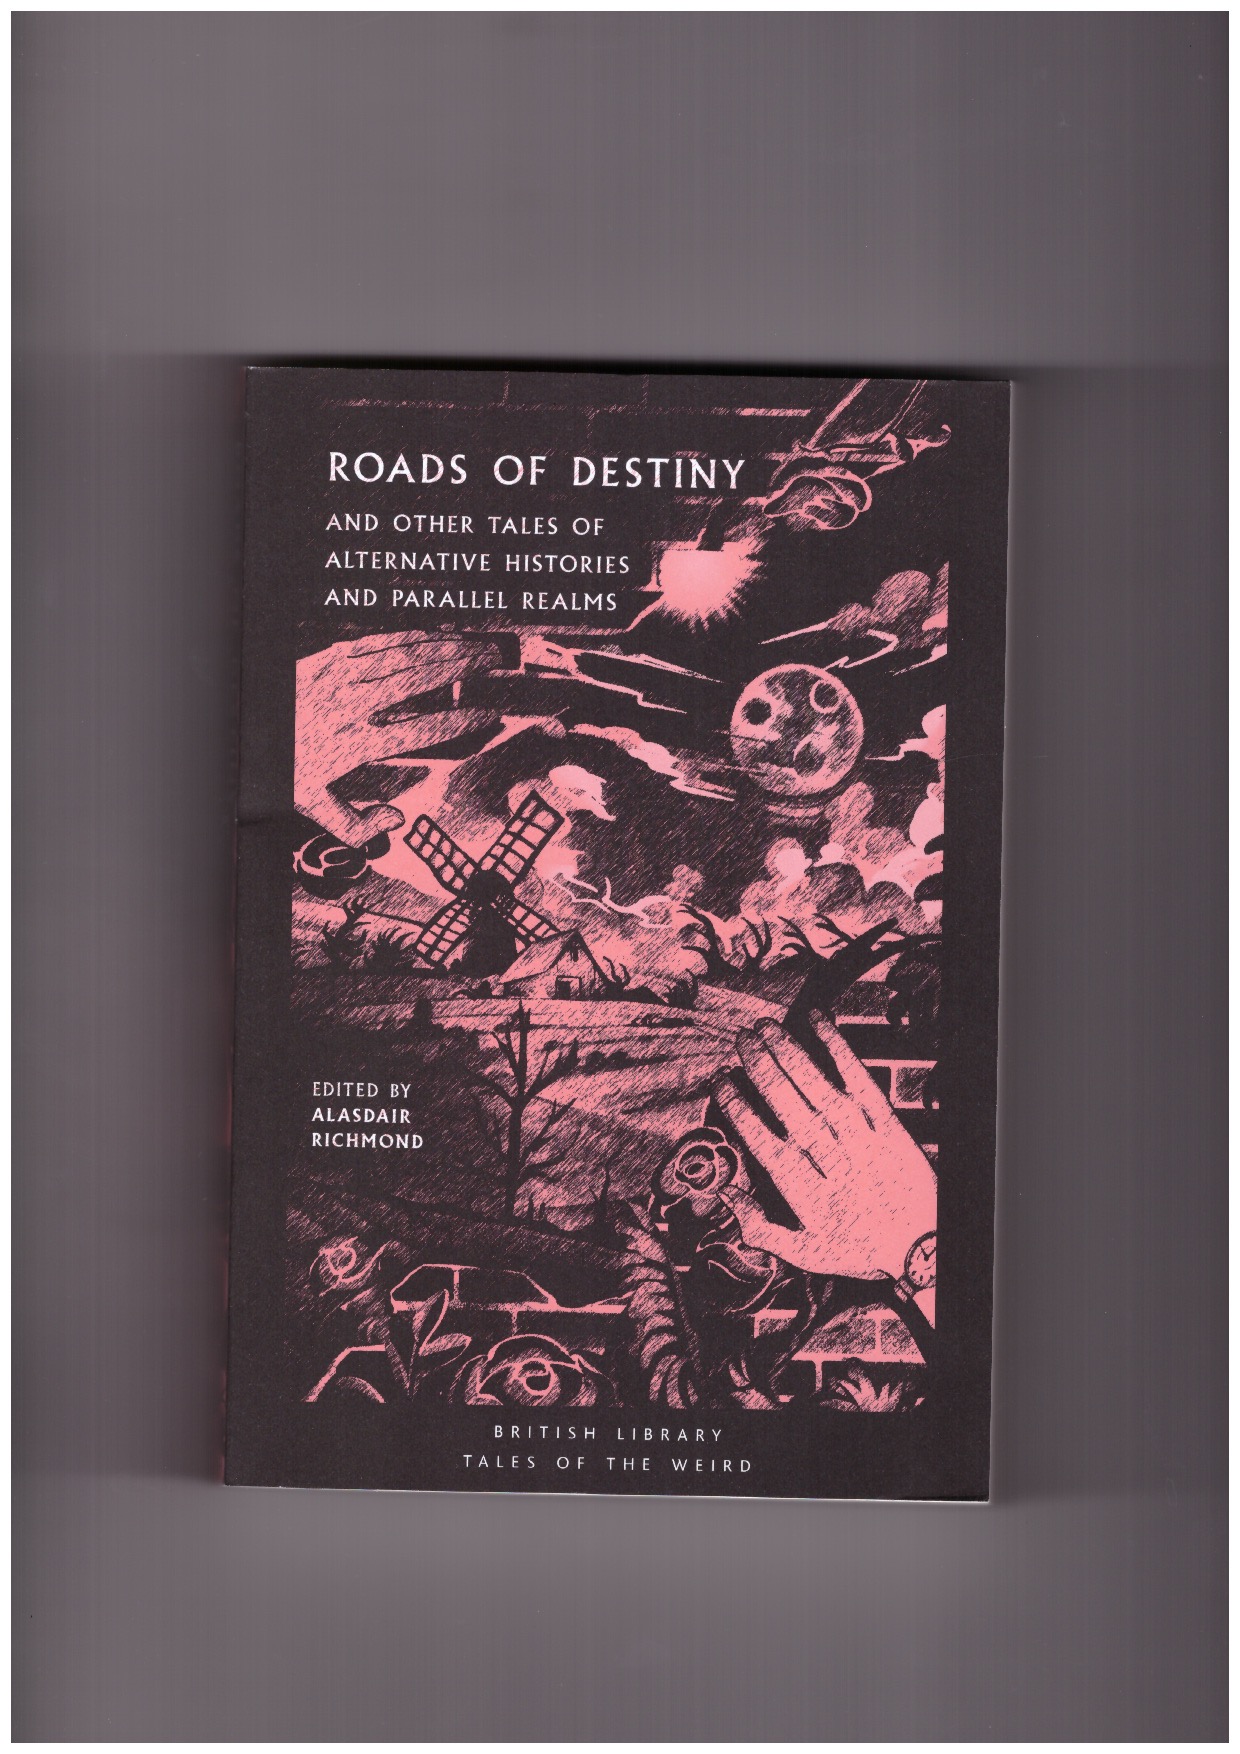 RICHMOND, Alasdair (ed.) - Roads of Destiny. And Other Tales of Alternative Histories and Parallel Realms